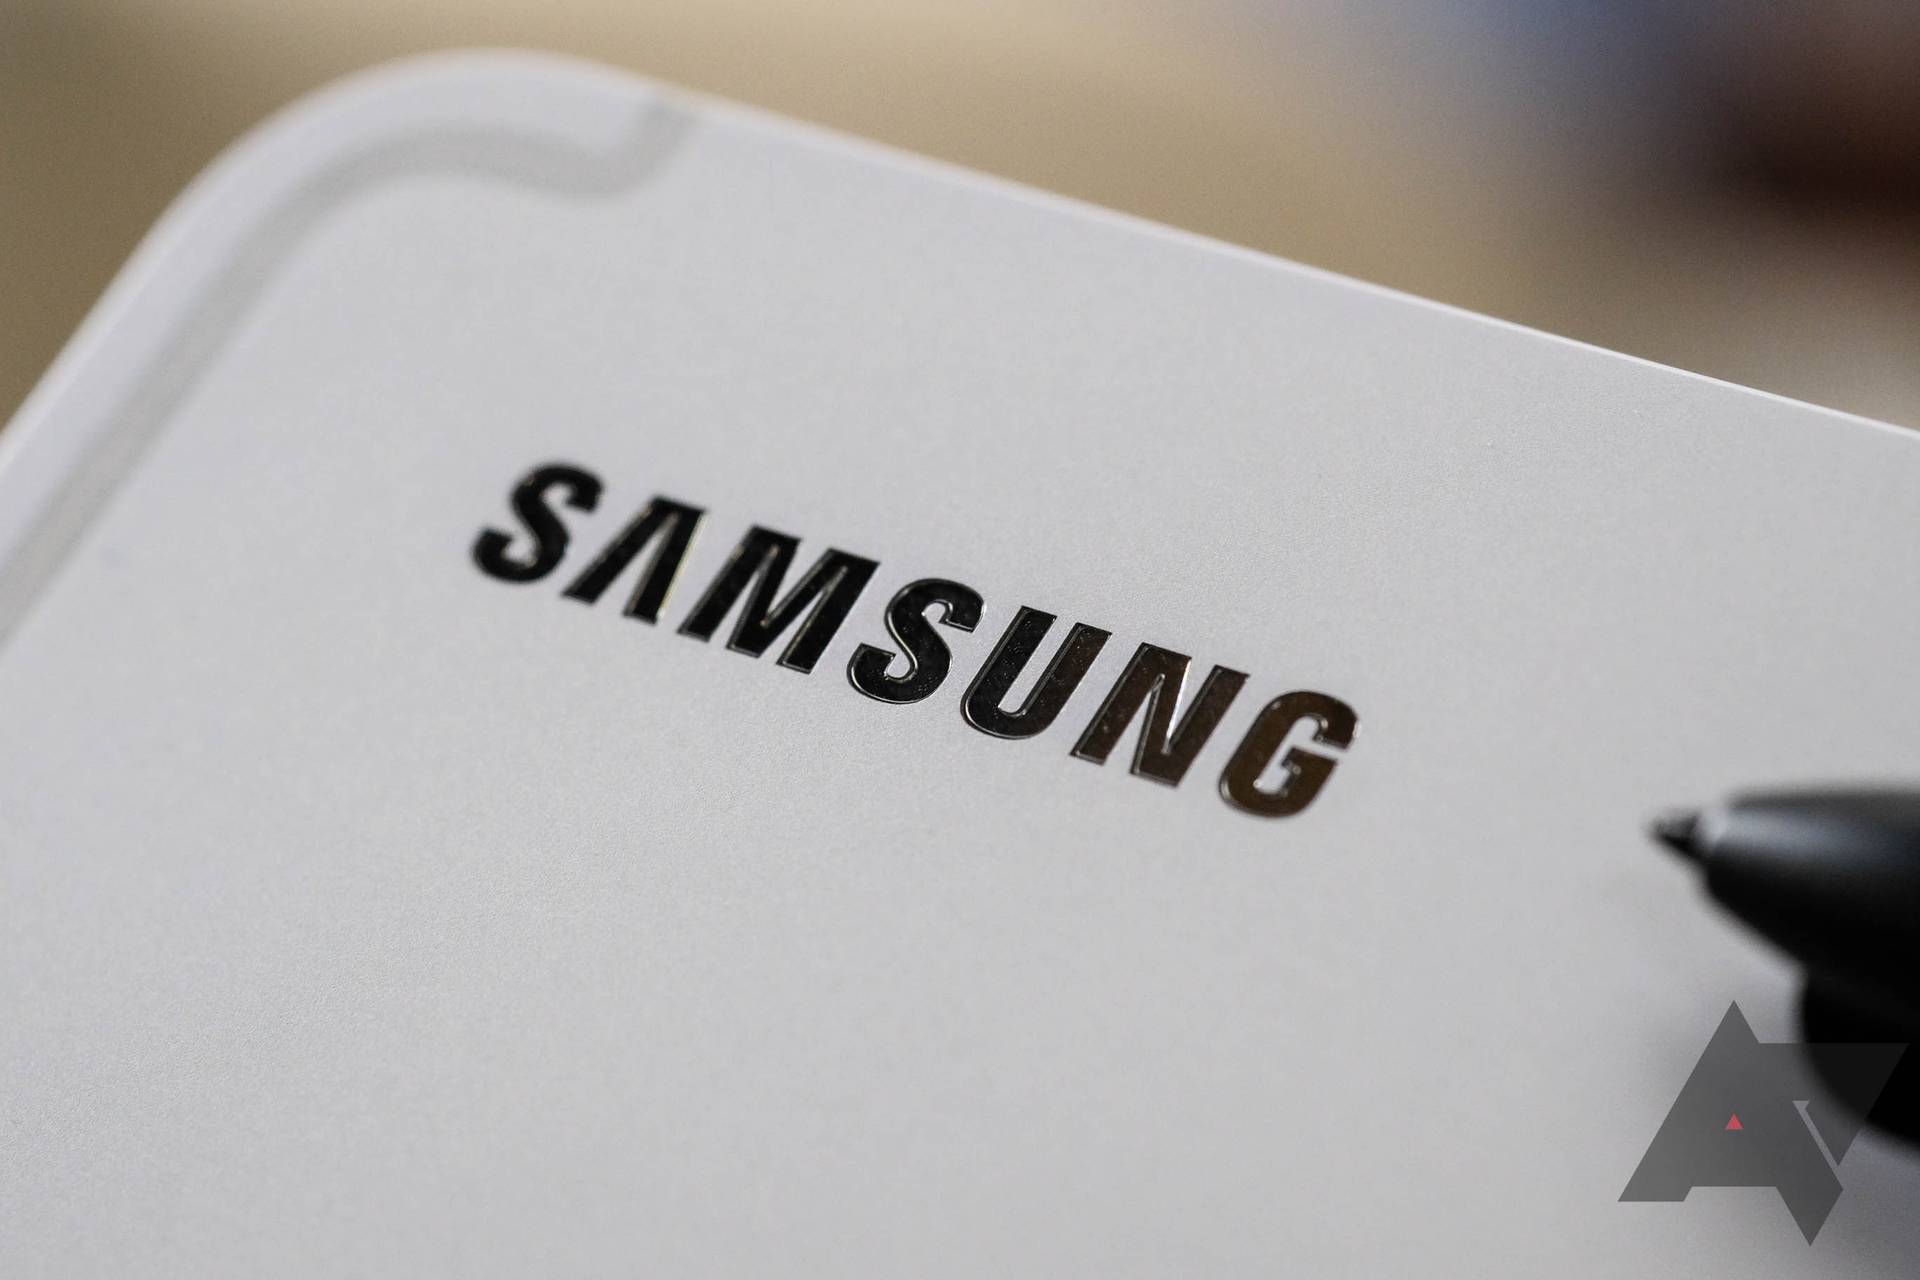 Samsung might bring advanced EV tech to smartphones to increase battery size